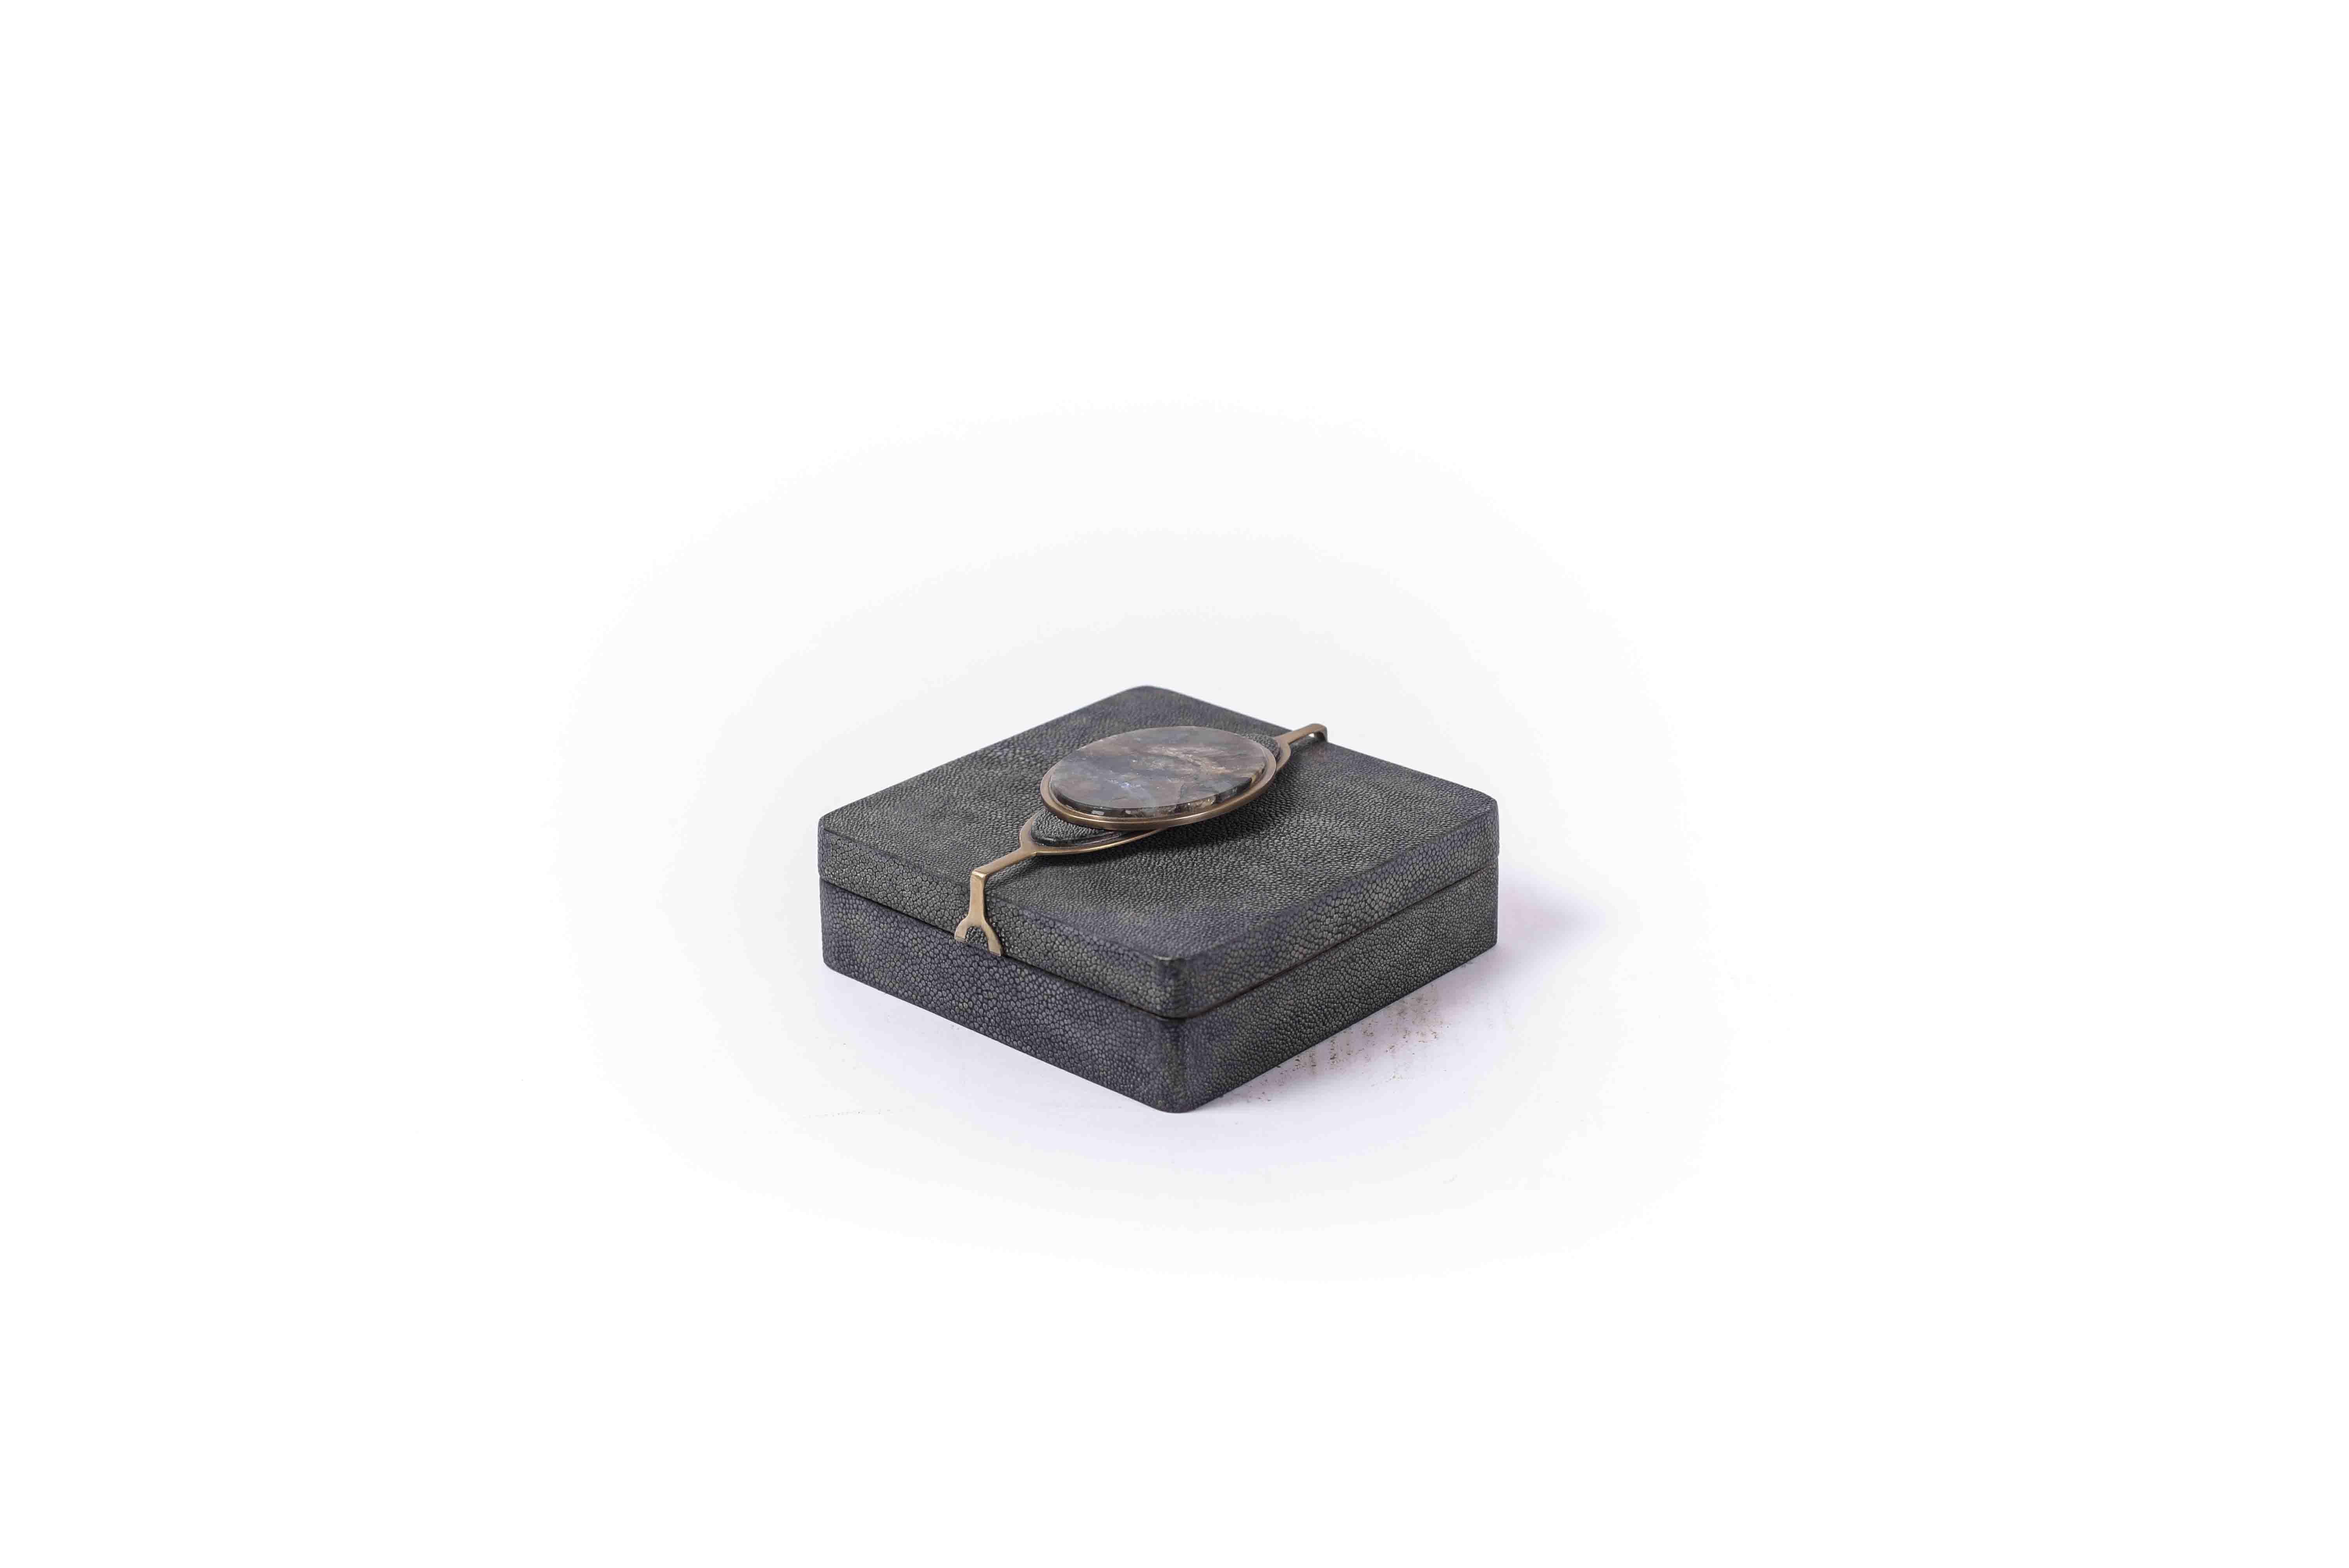 Two Shagreen Boxes with a Semi Precious Knob and Brass Details by Kifu Paris 2